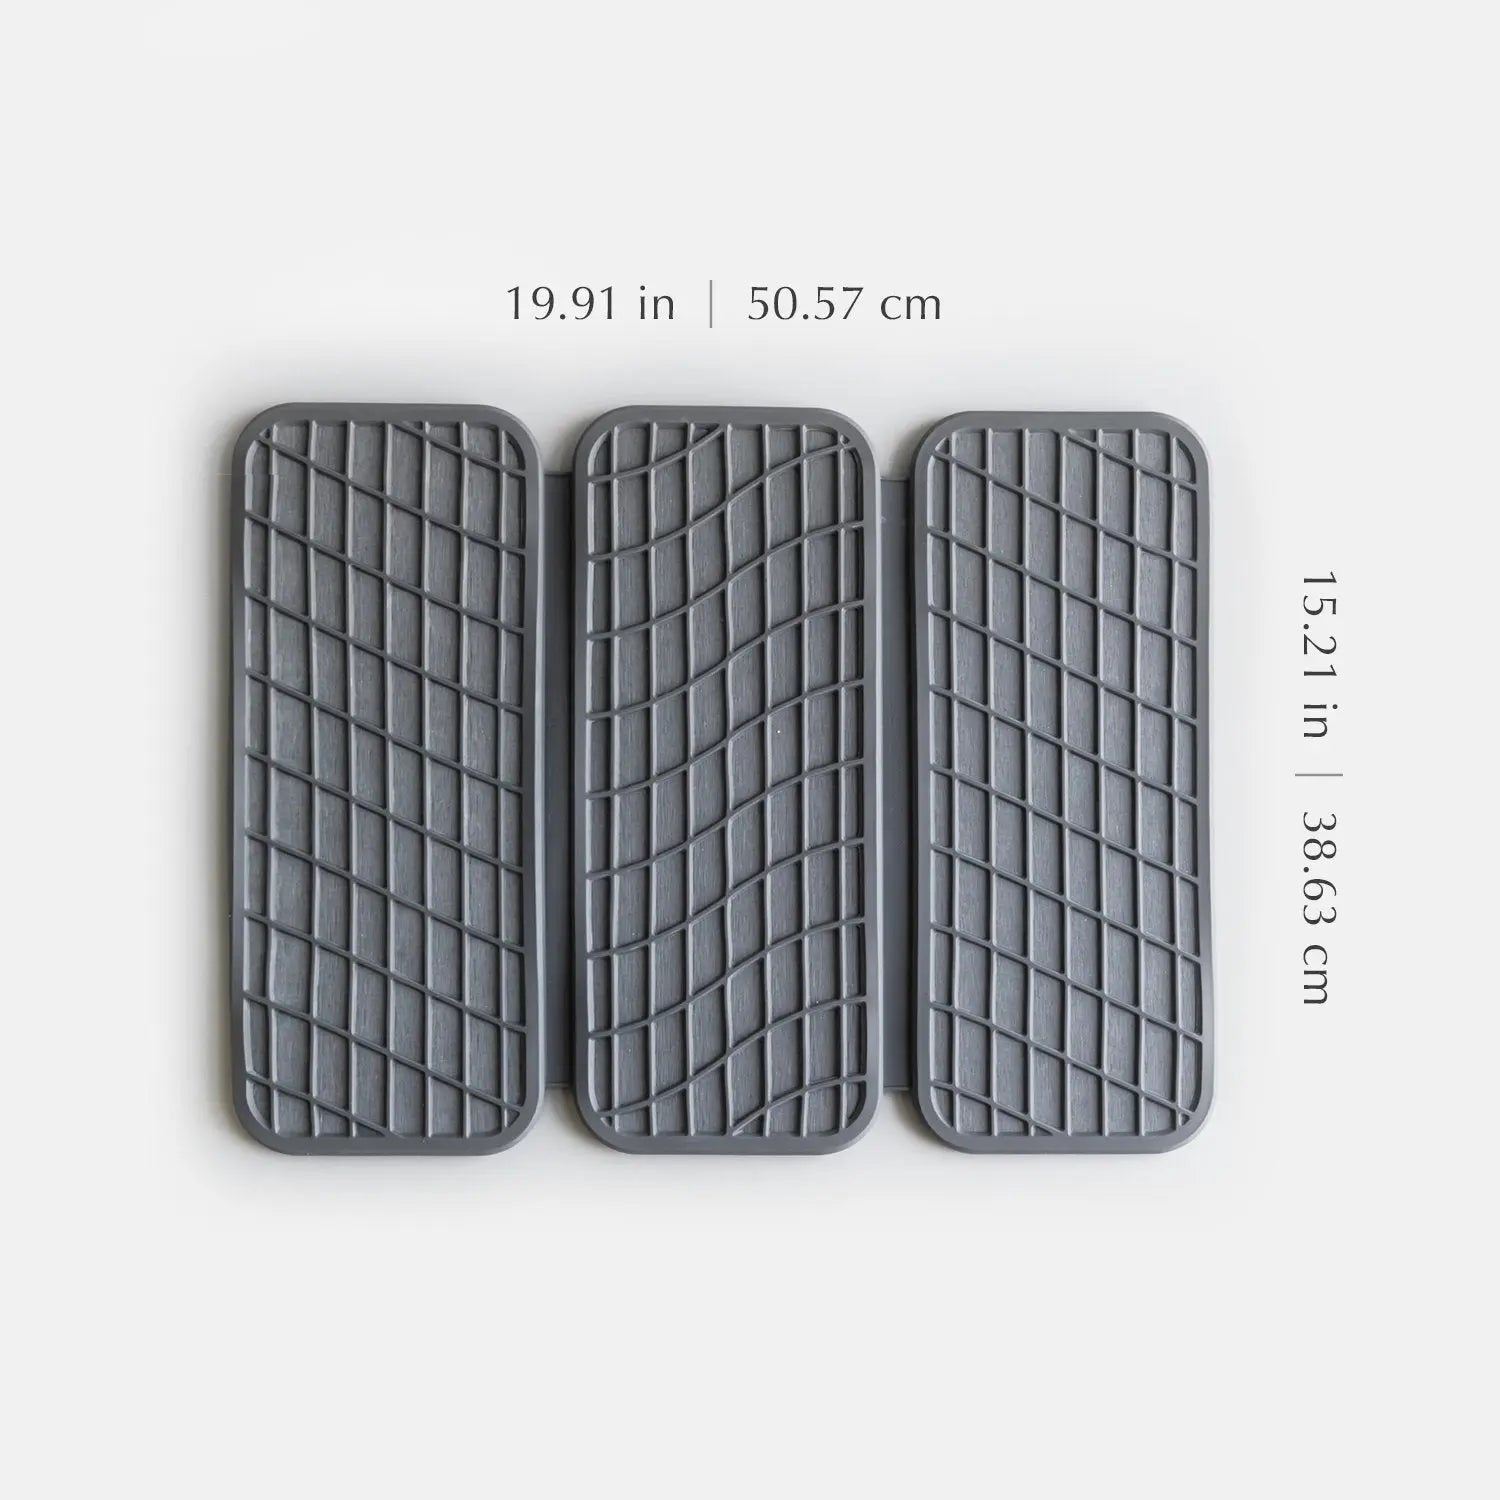 slate dish pad dimensions 19.91 inches by 15.21 inches (50.57cm by 38.63 cm)